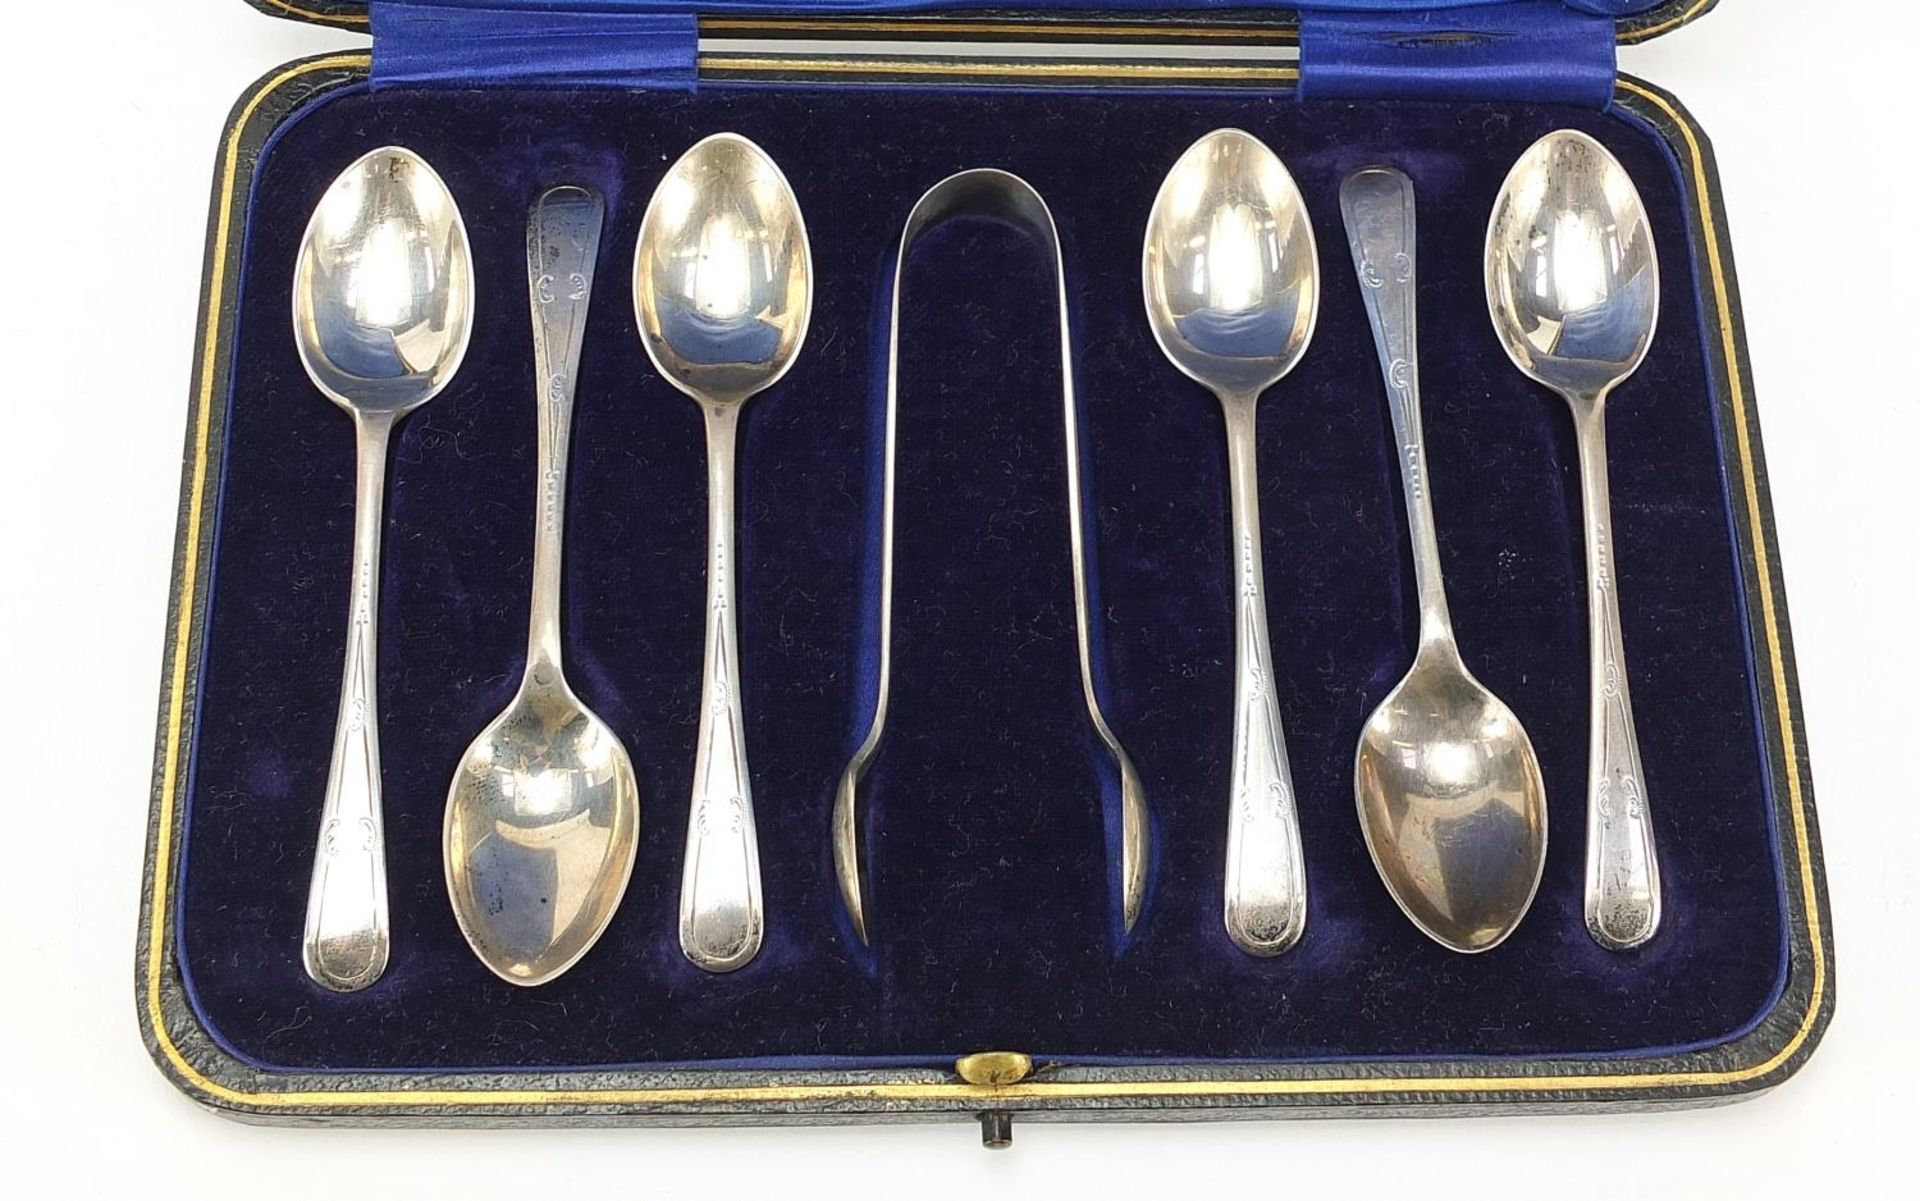 W S Savage & Co, set of six silver teaspoons and sugar tongs housed in a fitted case, Sheffield - Image 2 of 6